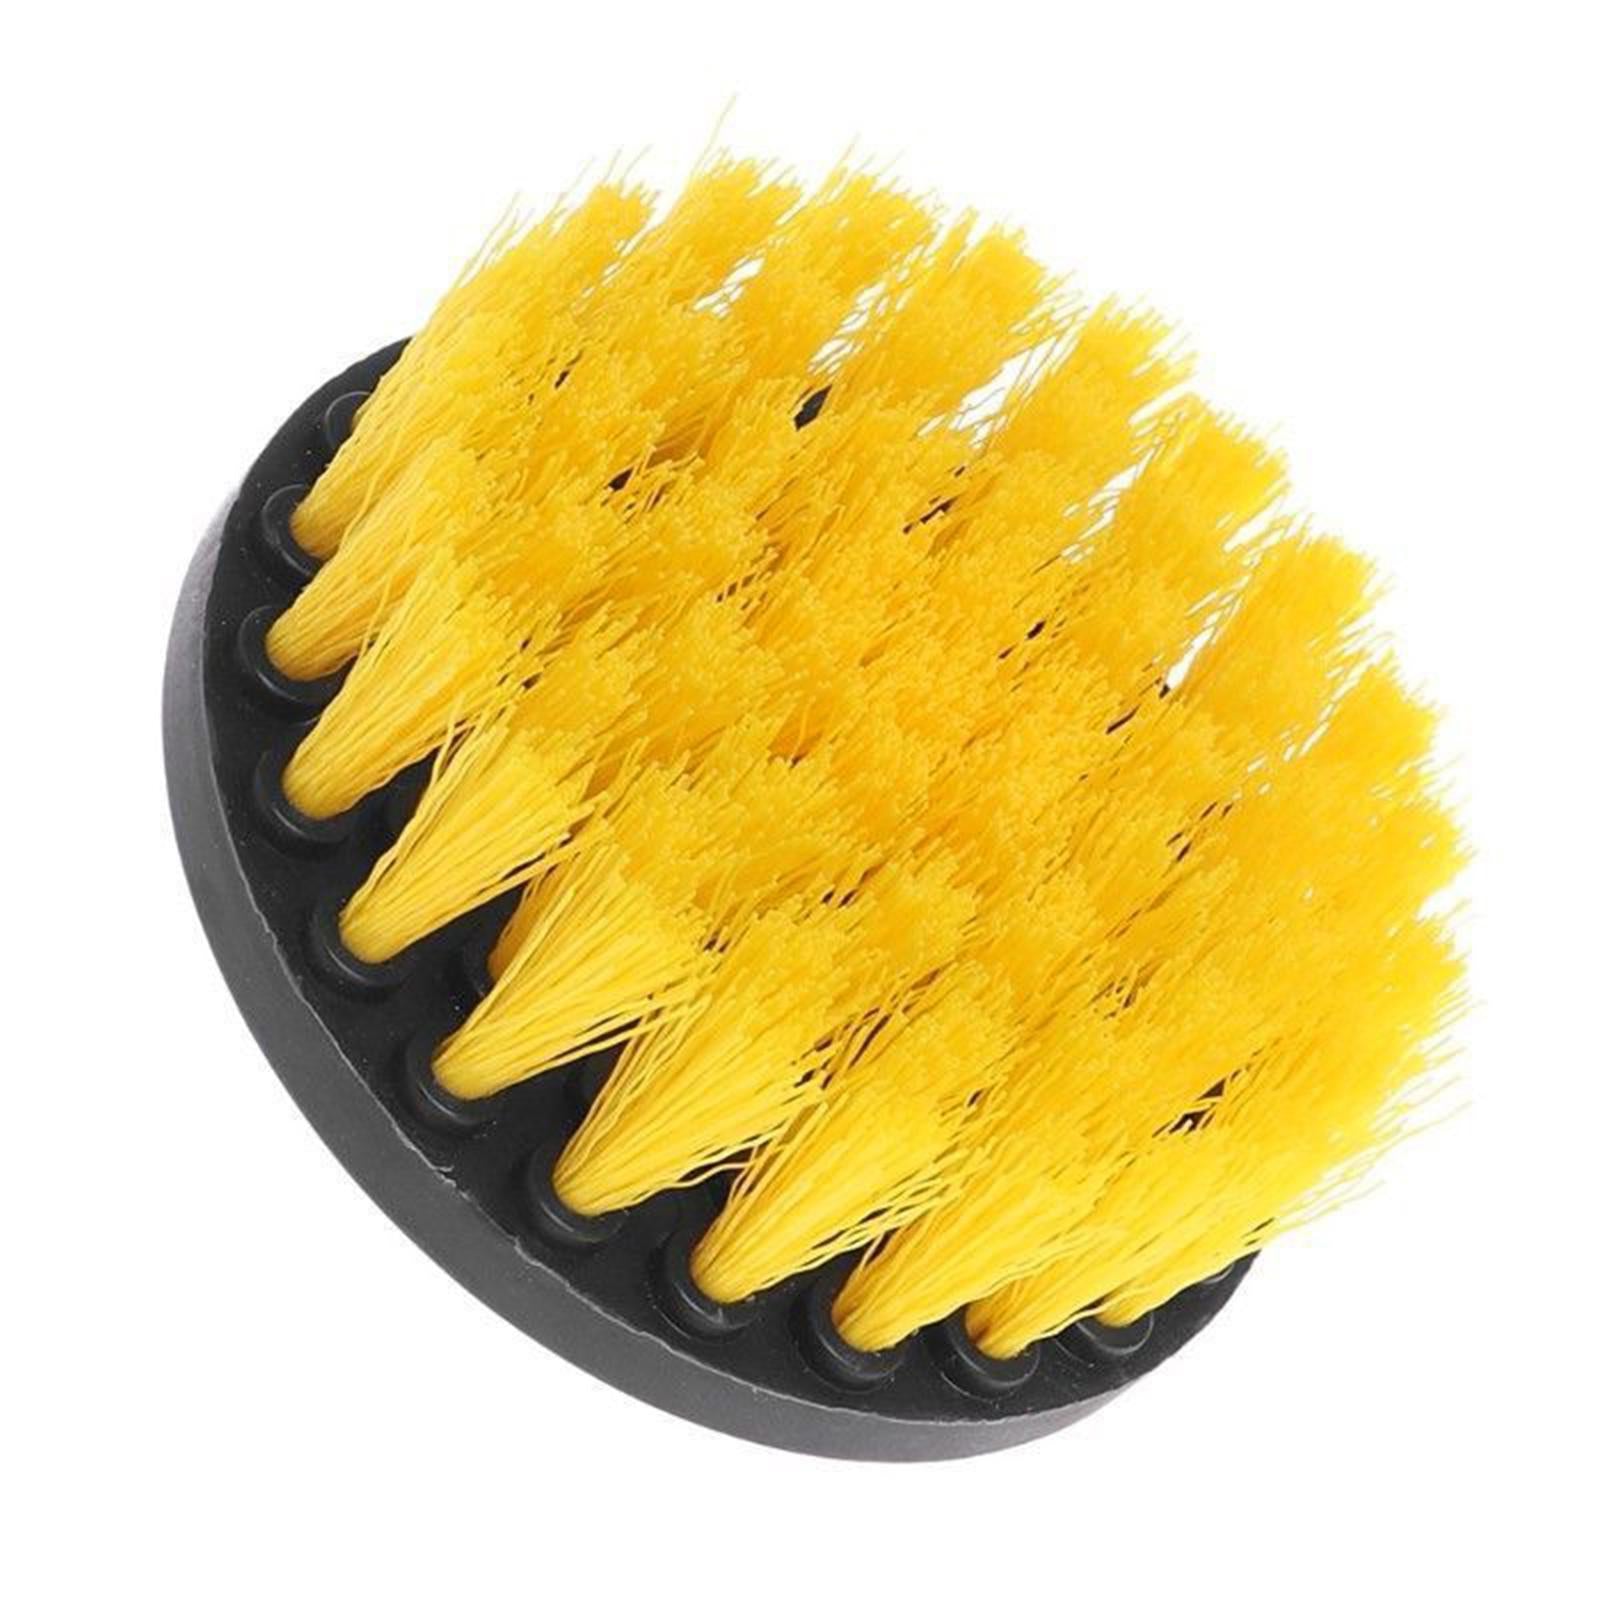 7Pcs Drill Brush Attachment Cleaner Combo Replacement